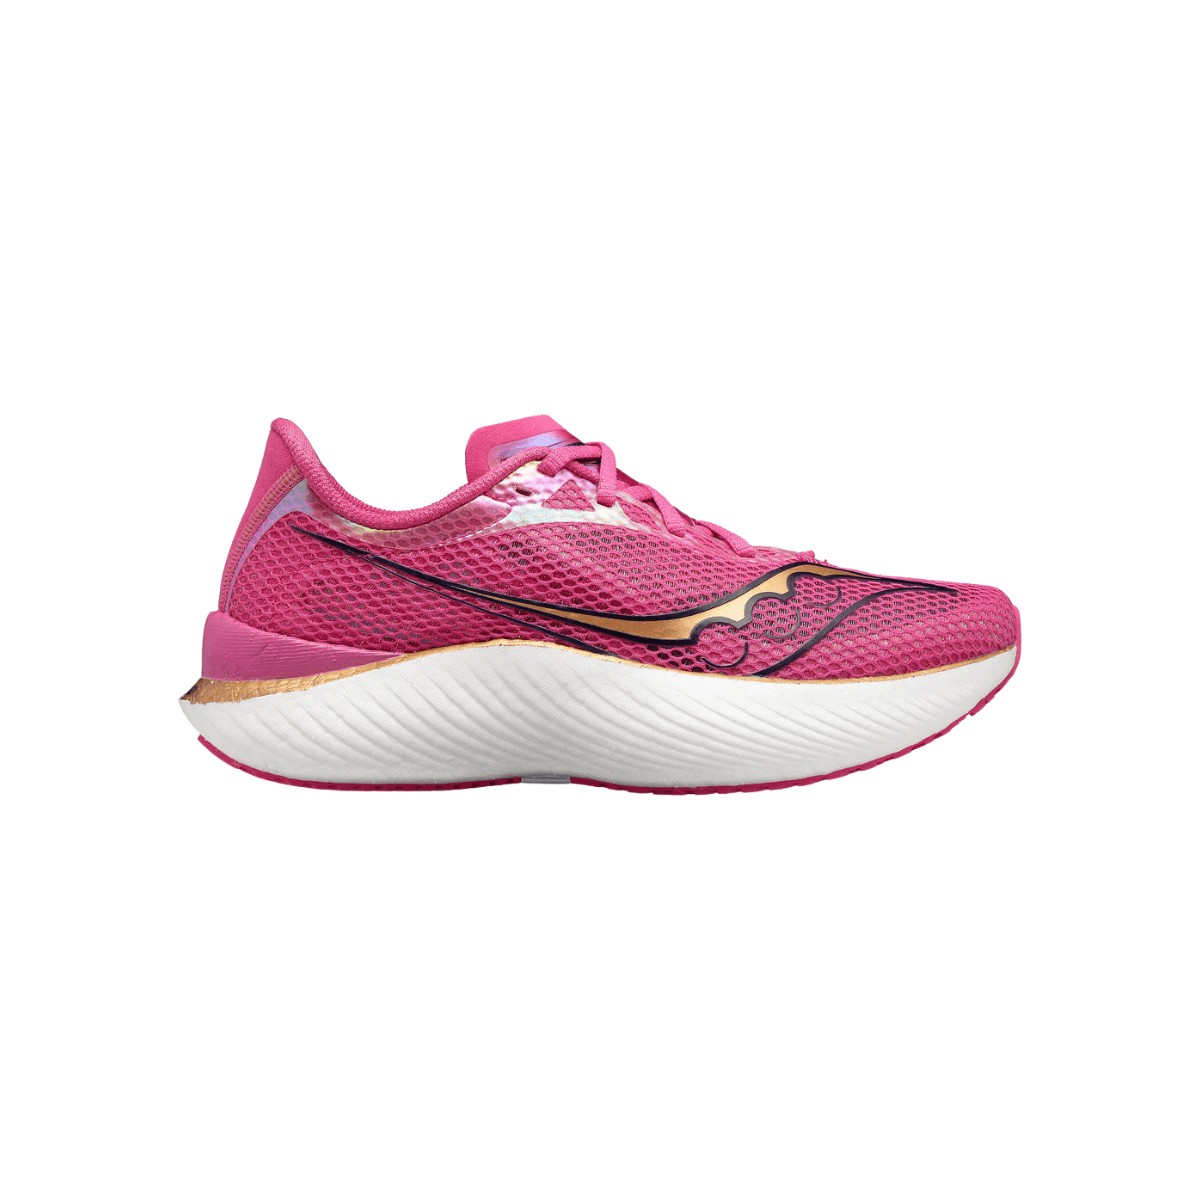 Chaussures Saucony Endorphin Pro 3 Rose Blanche AW22